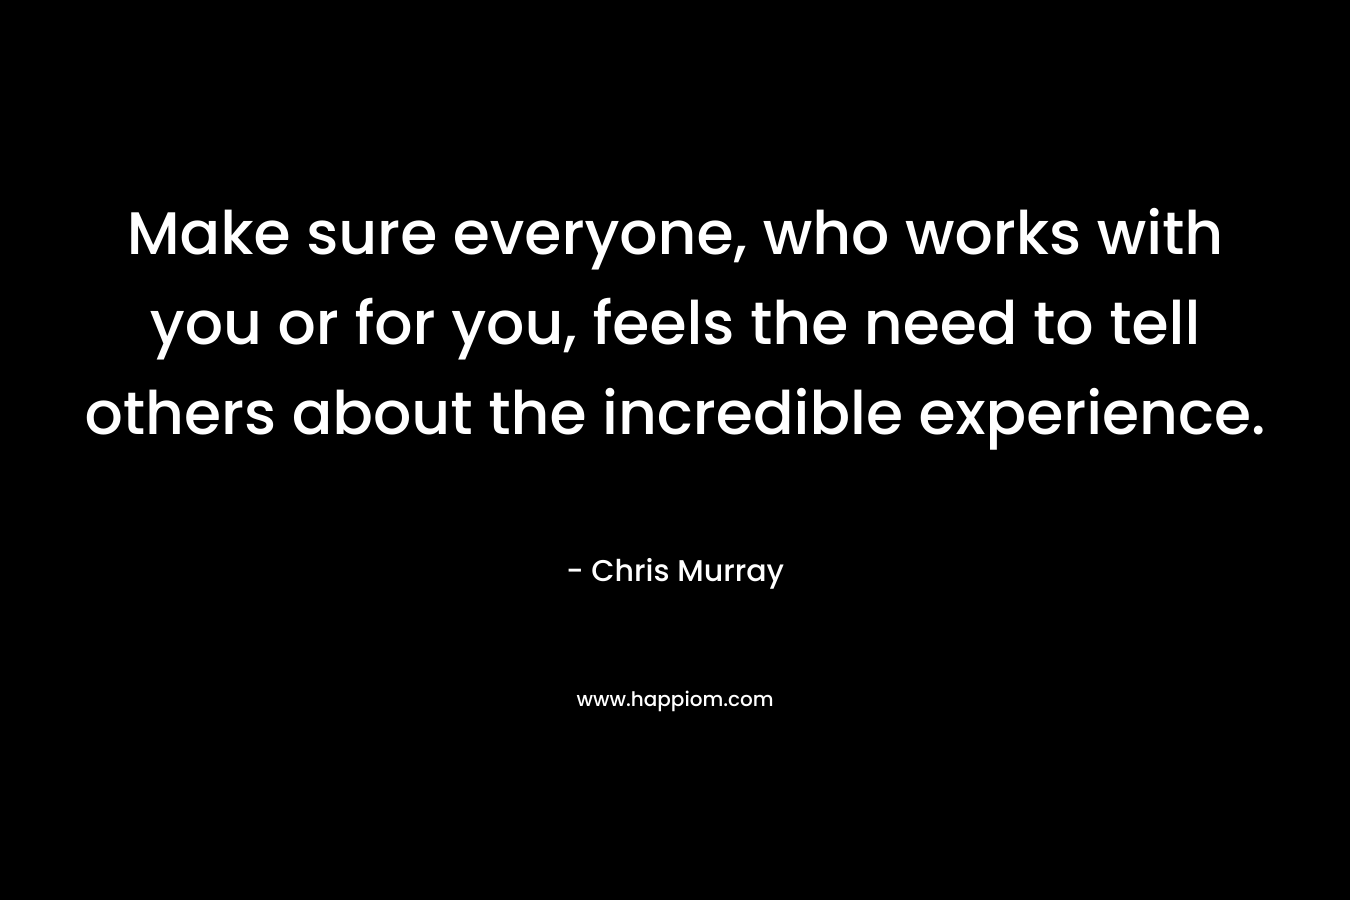 Make sure everyone, who works with you or for you, feels the need to tell others about the incredible experience.